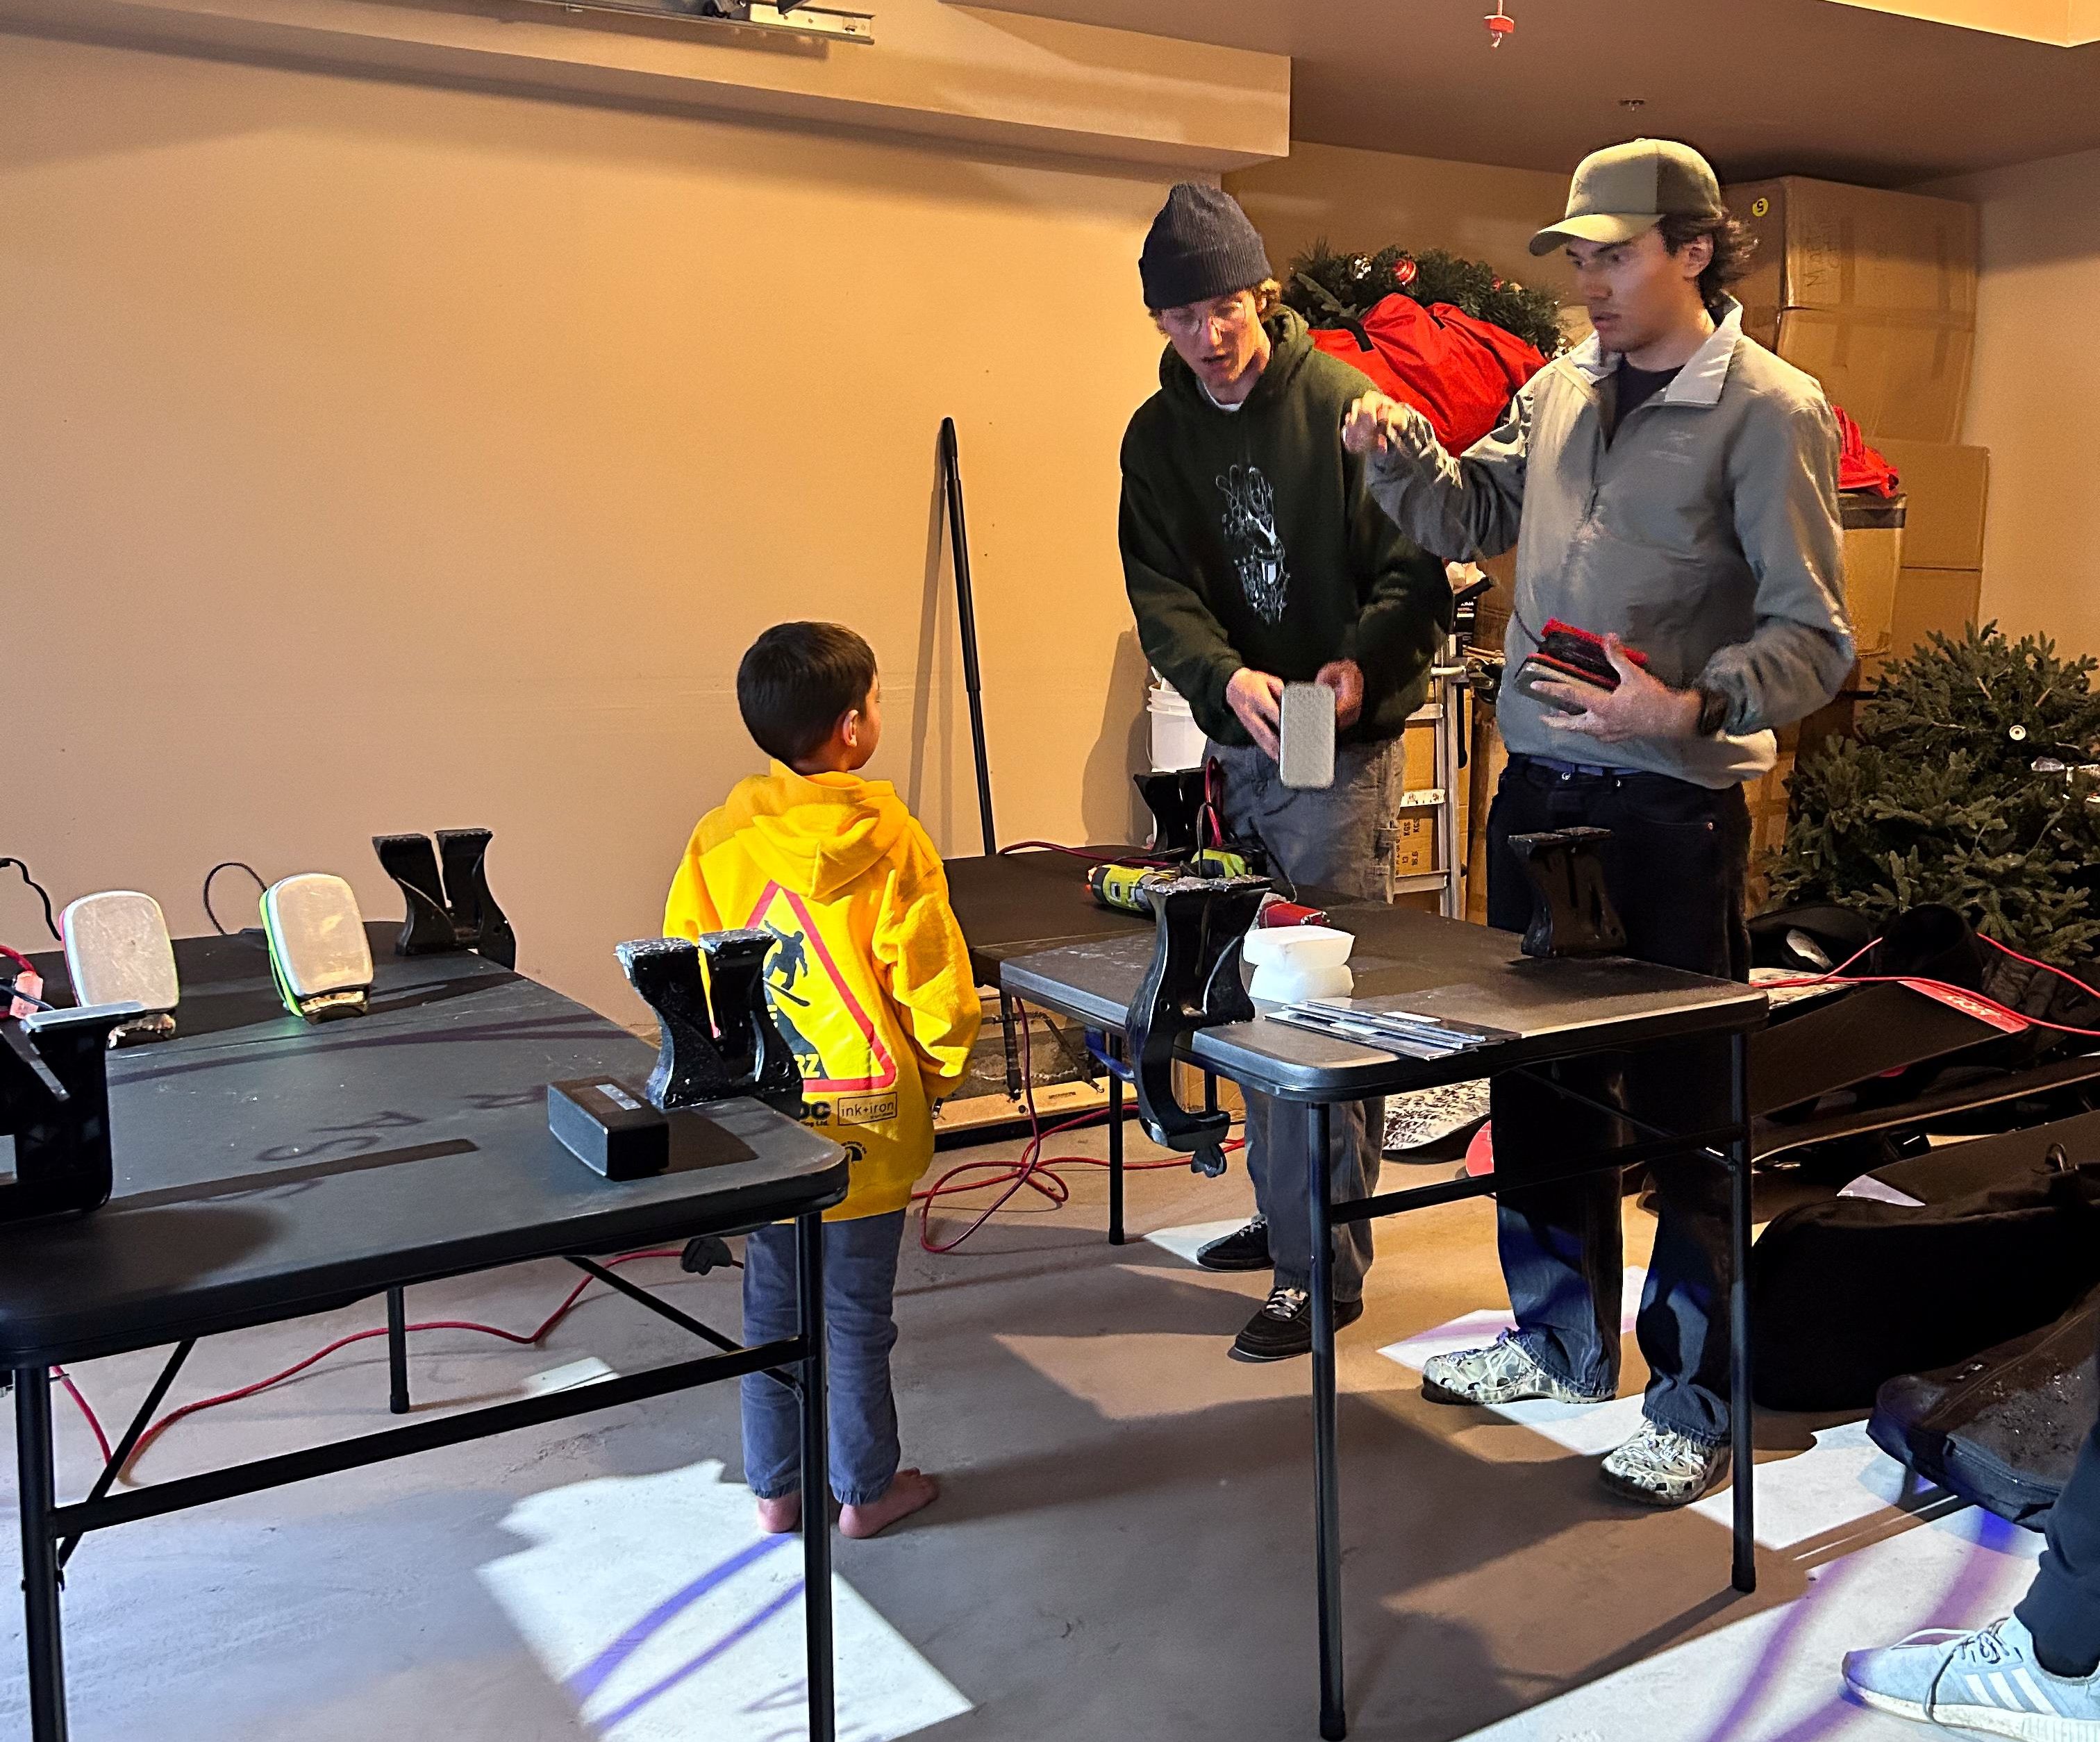 Liam Gill and a friend show a young snowboarder how to wax a snowboard